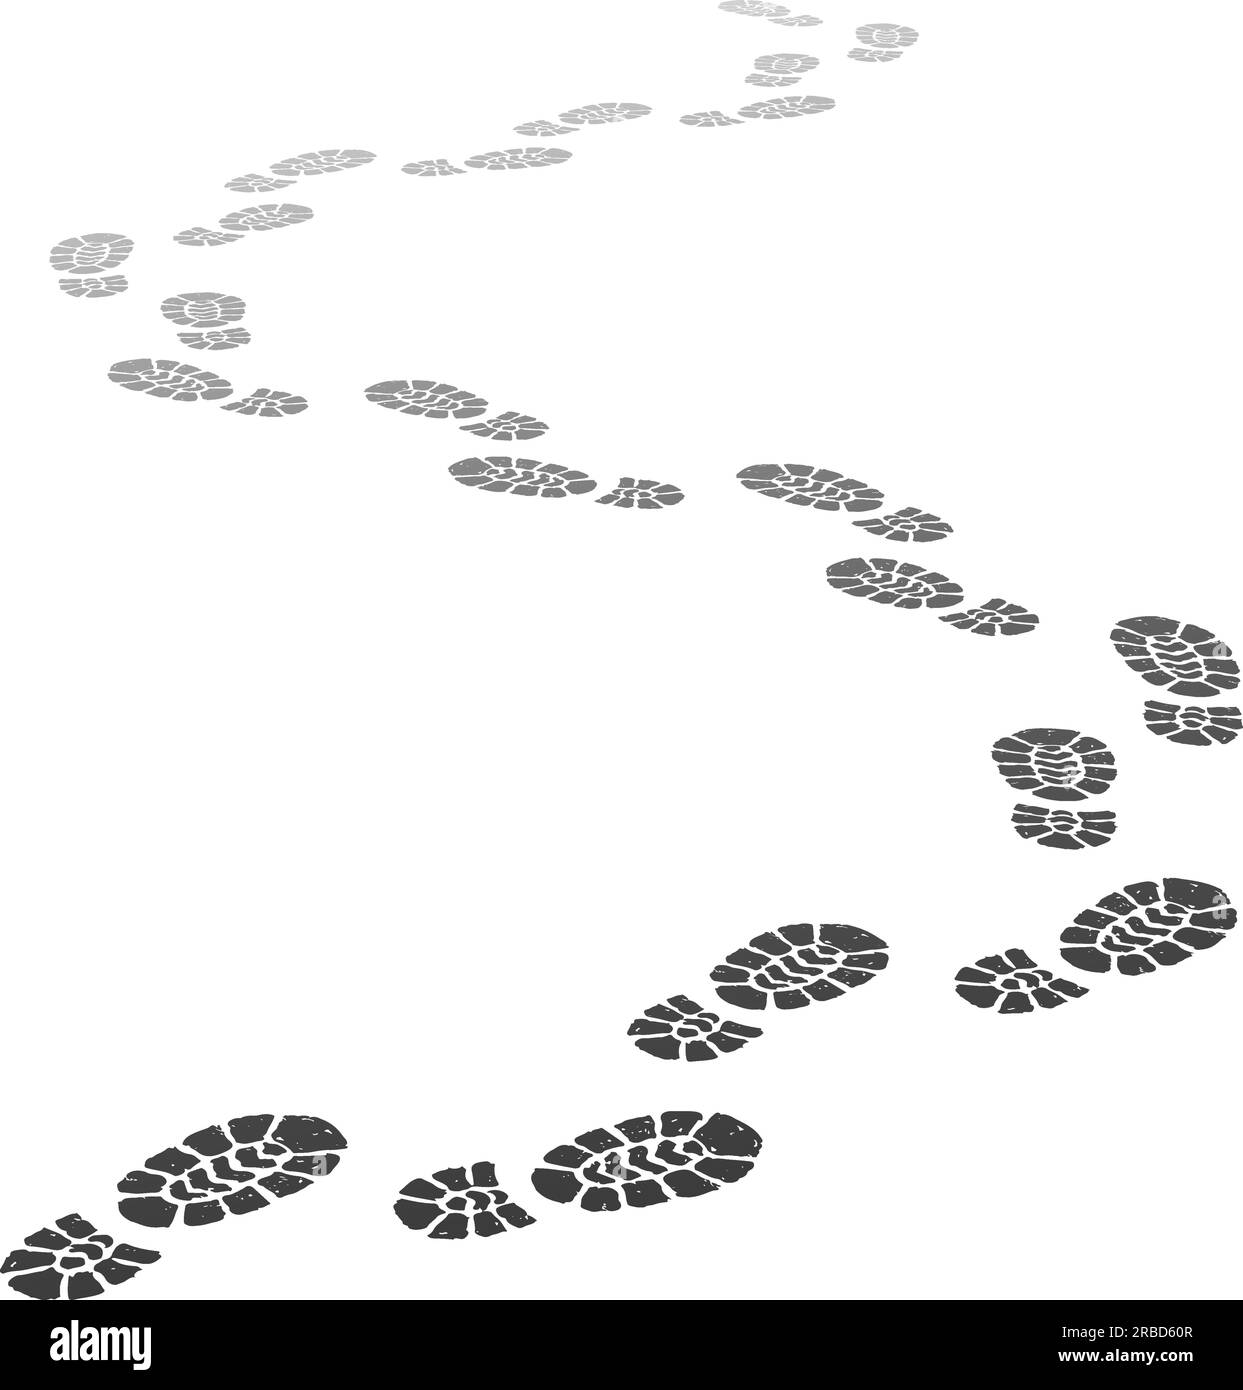 Walking away footsteps. Outgoing footprint silhouette, footstep prints ...